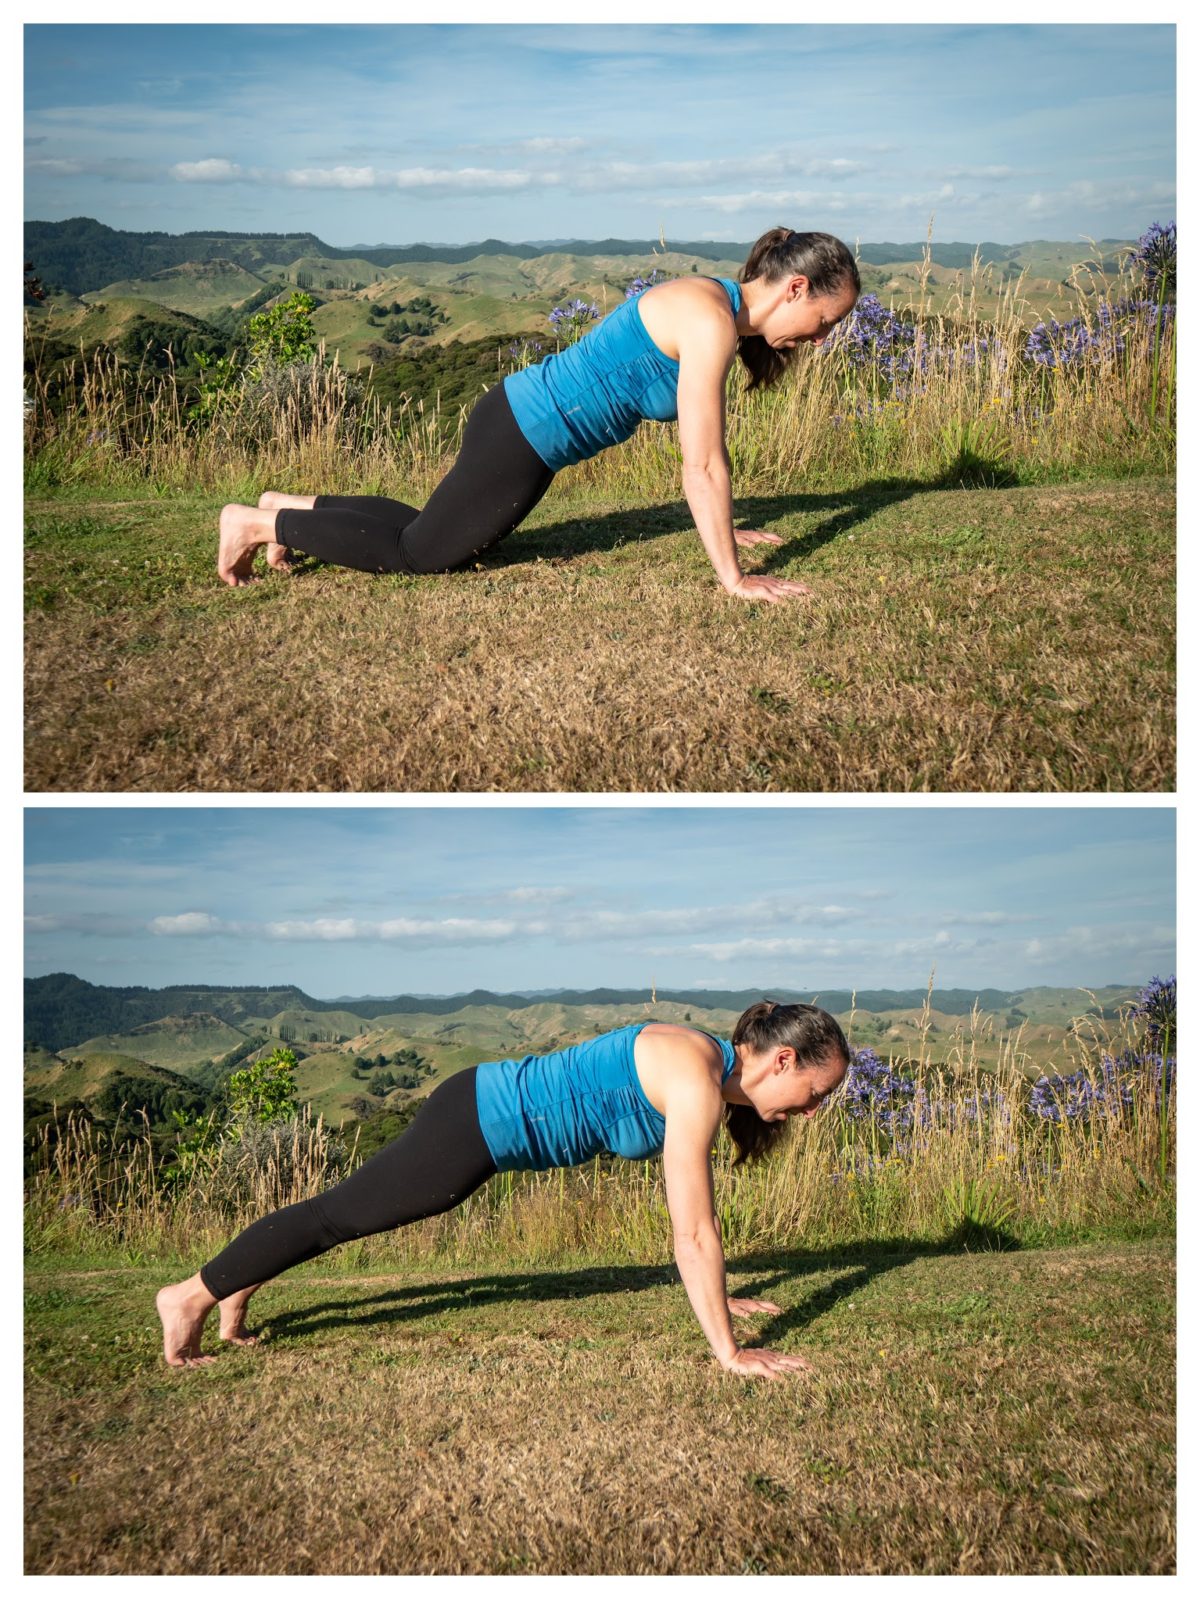 plank with knees up or down